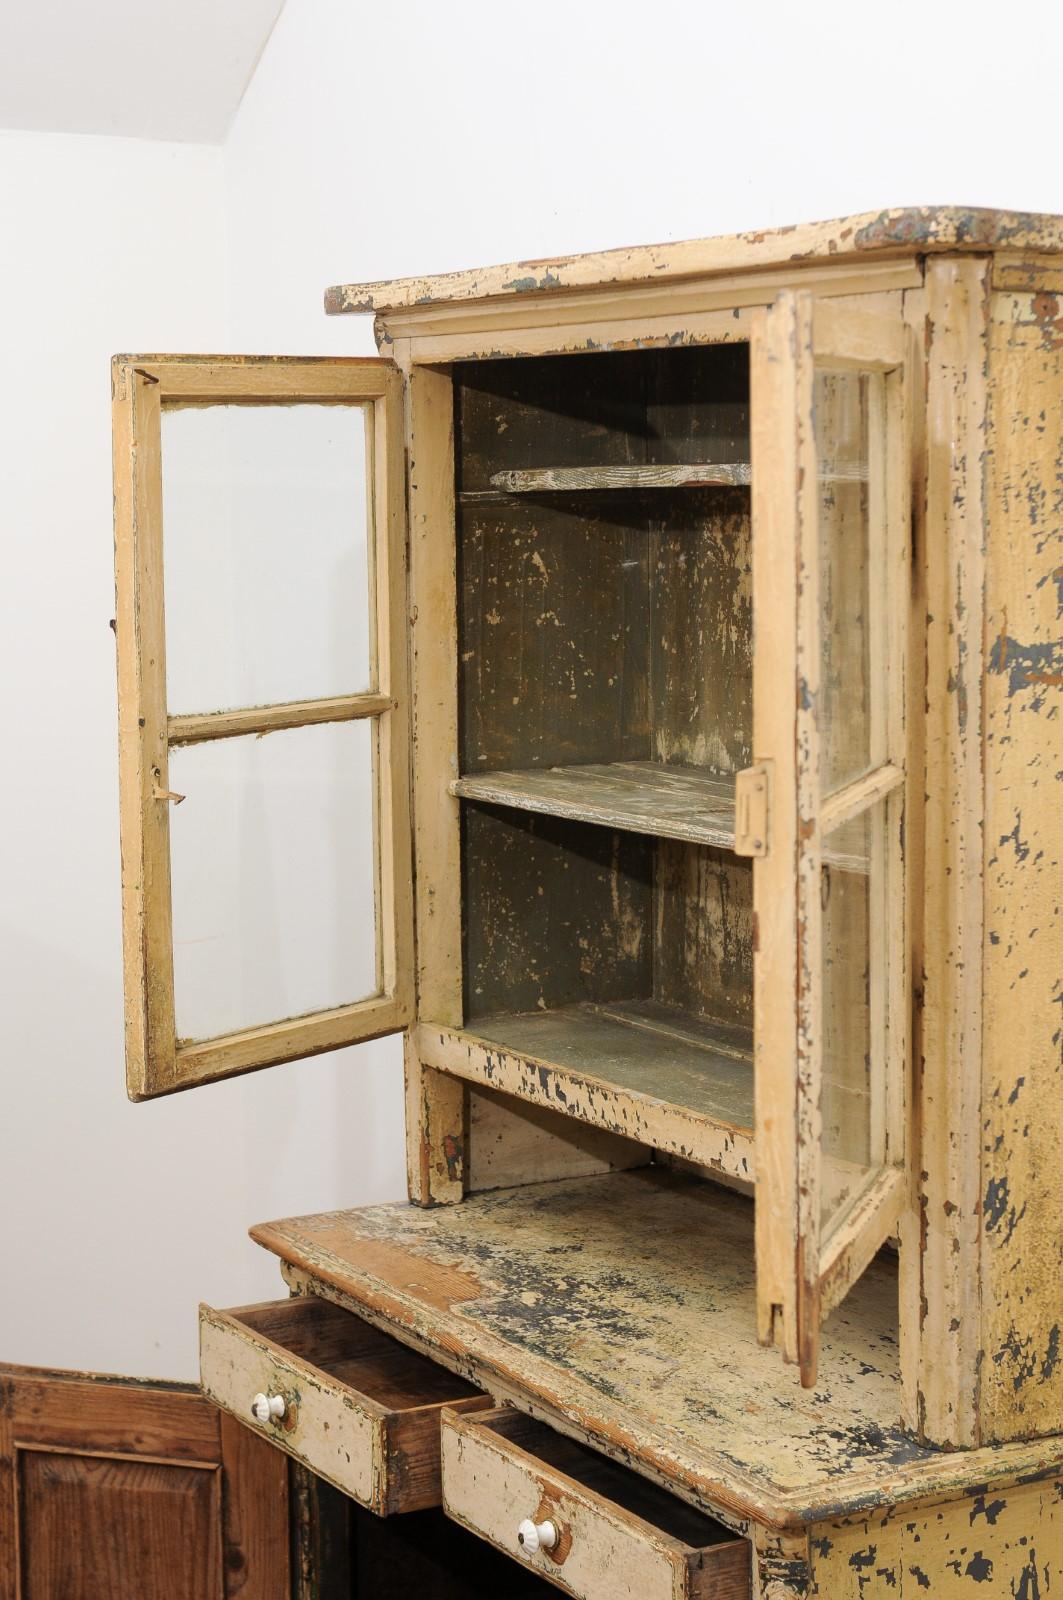 19th Century American Rustic Cabinet with Glass Doors and Distressed Finish 1